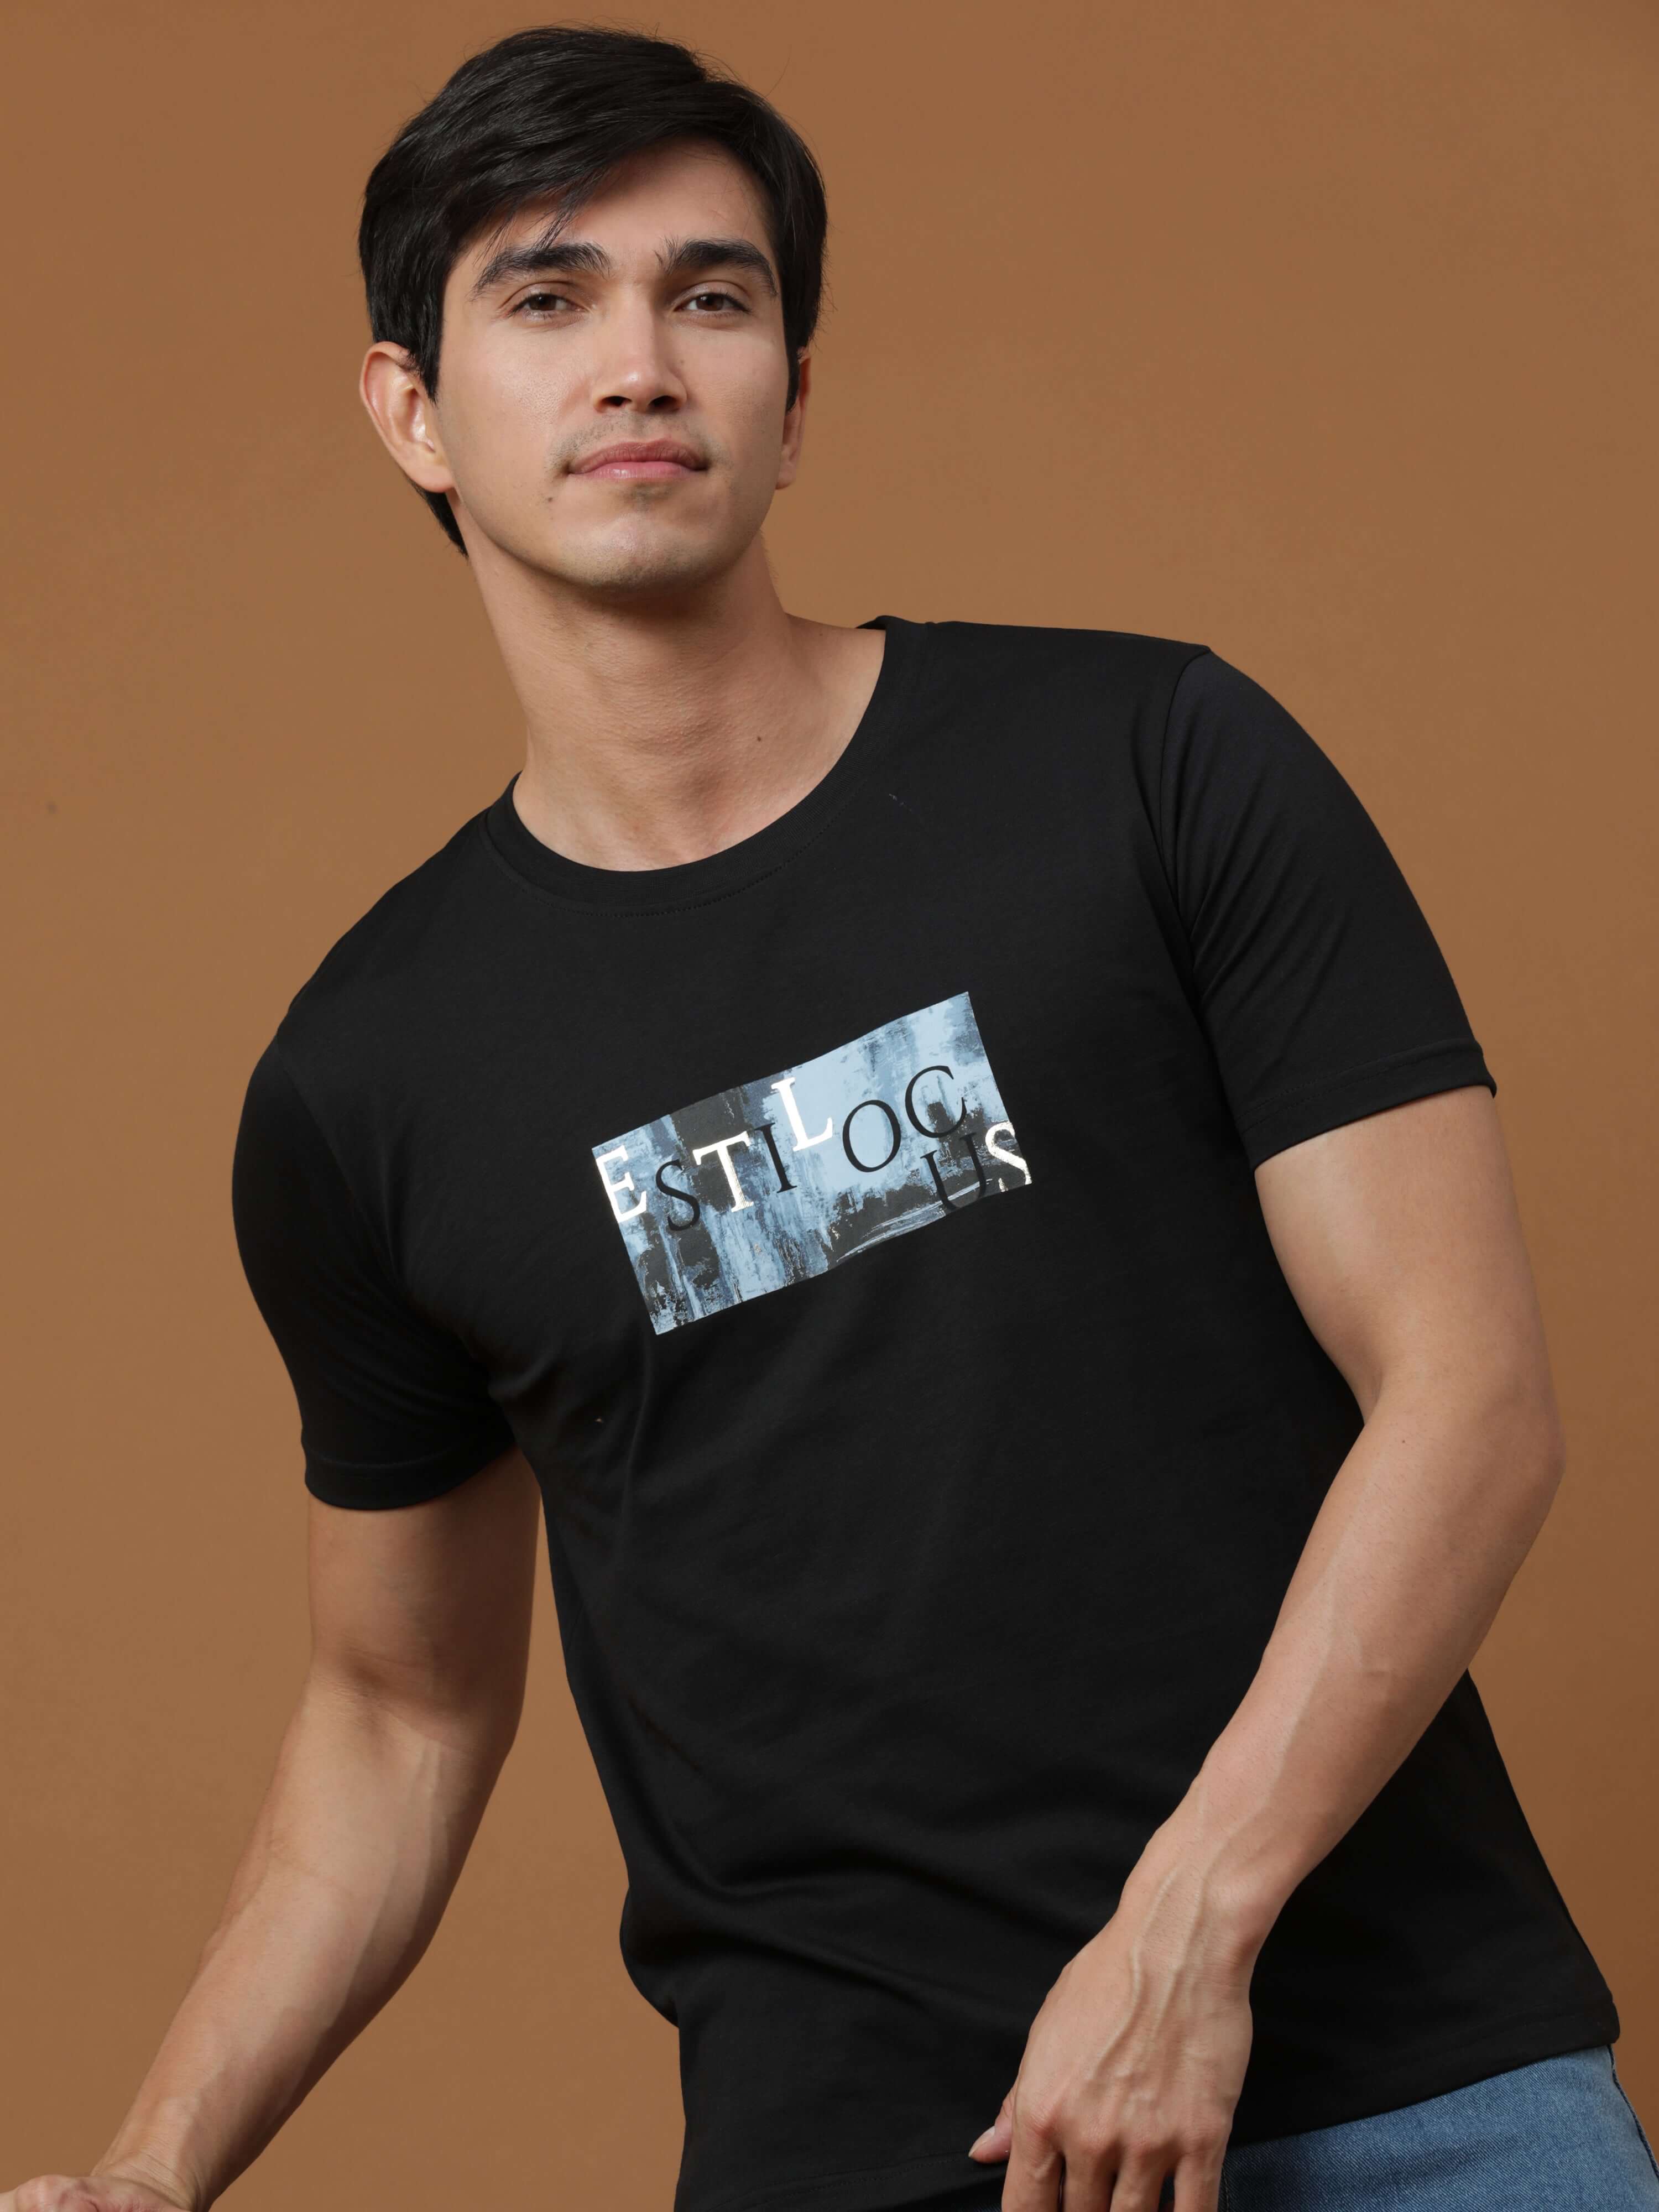 Vintage Black Printed T Shirt shop online at Estilocus. 100% Cotton Designed and printed on knitted fabric. The fabric is stretchy and lightweight, with a soft skin feel and no wrinkles. Crew neck collar which is smooth on the neck and keeps you comfortab